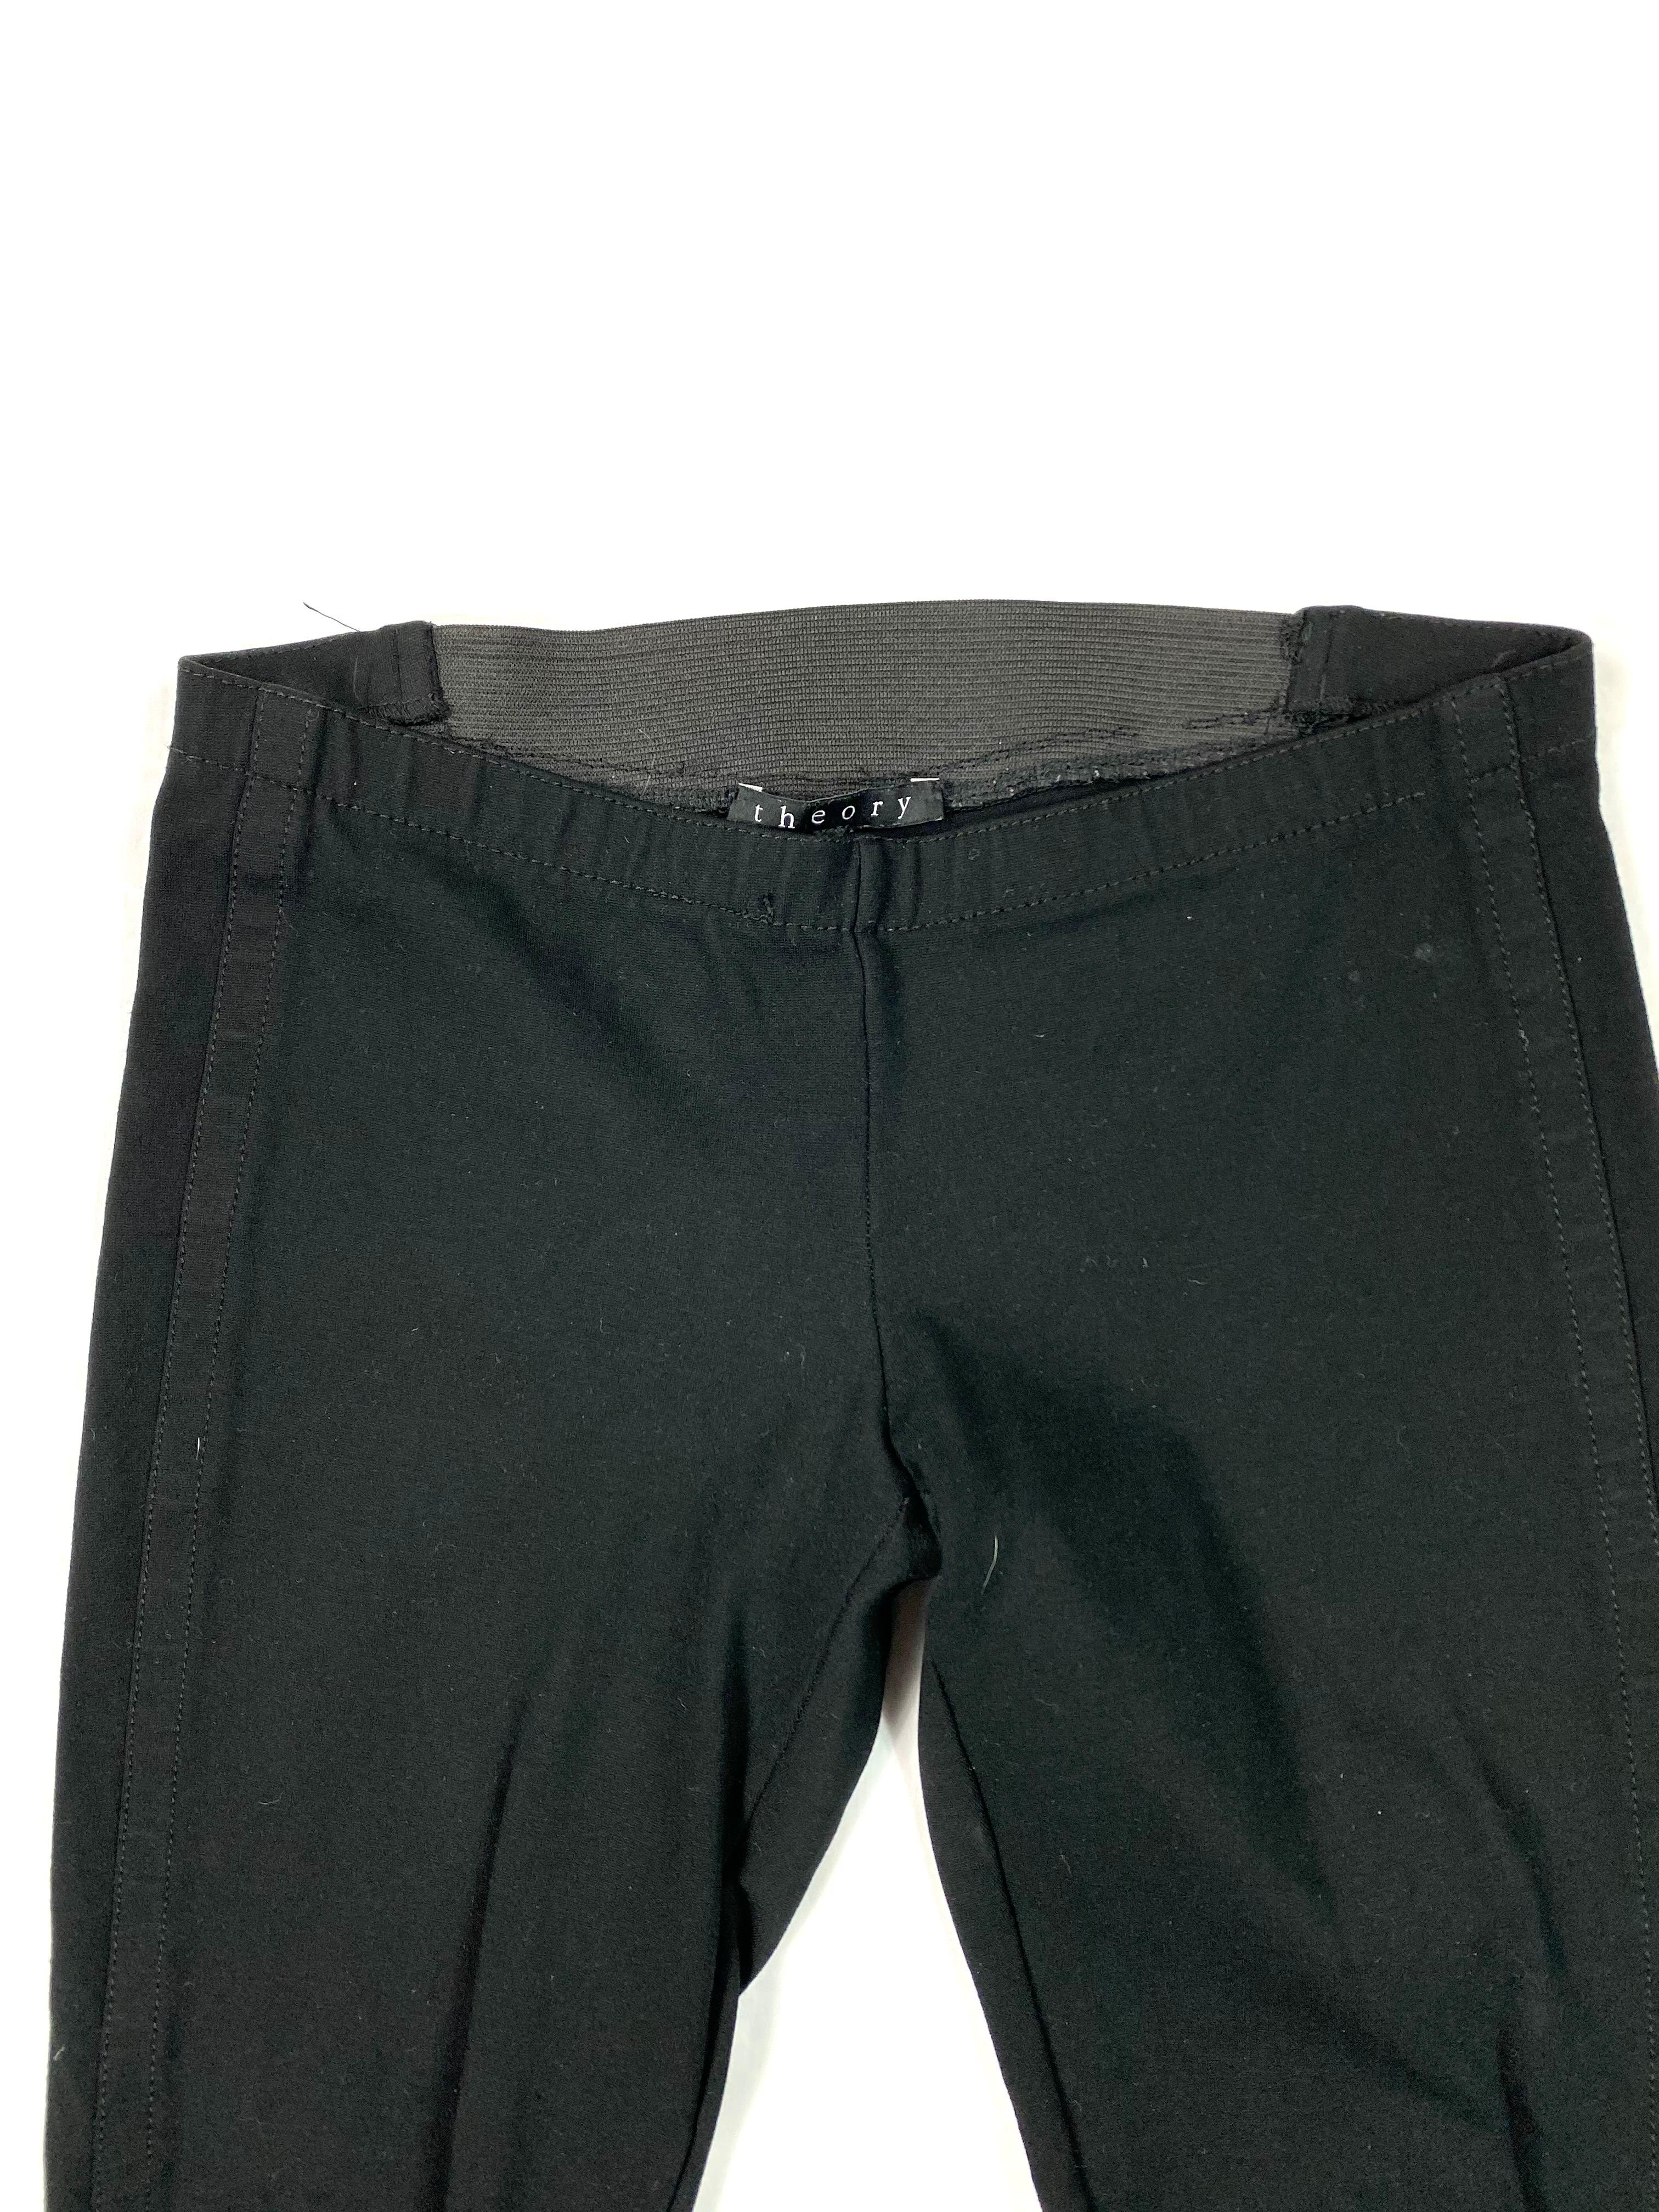 Product details:

The pants feature skinny fit with stretchy rubber on the back, leggings style pants.